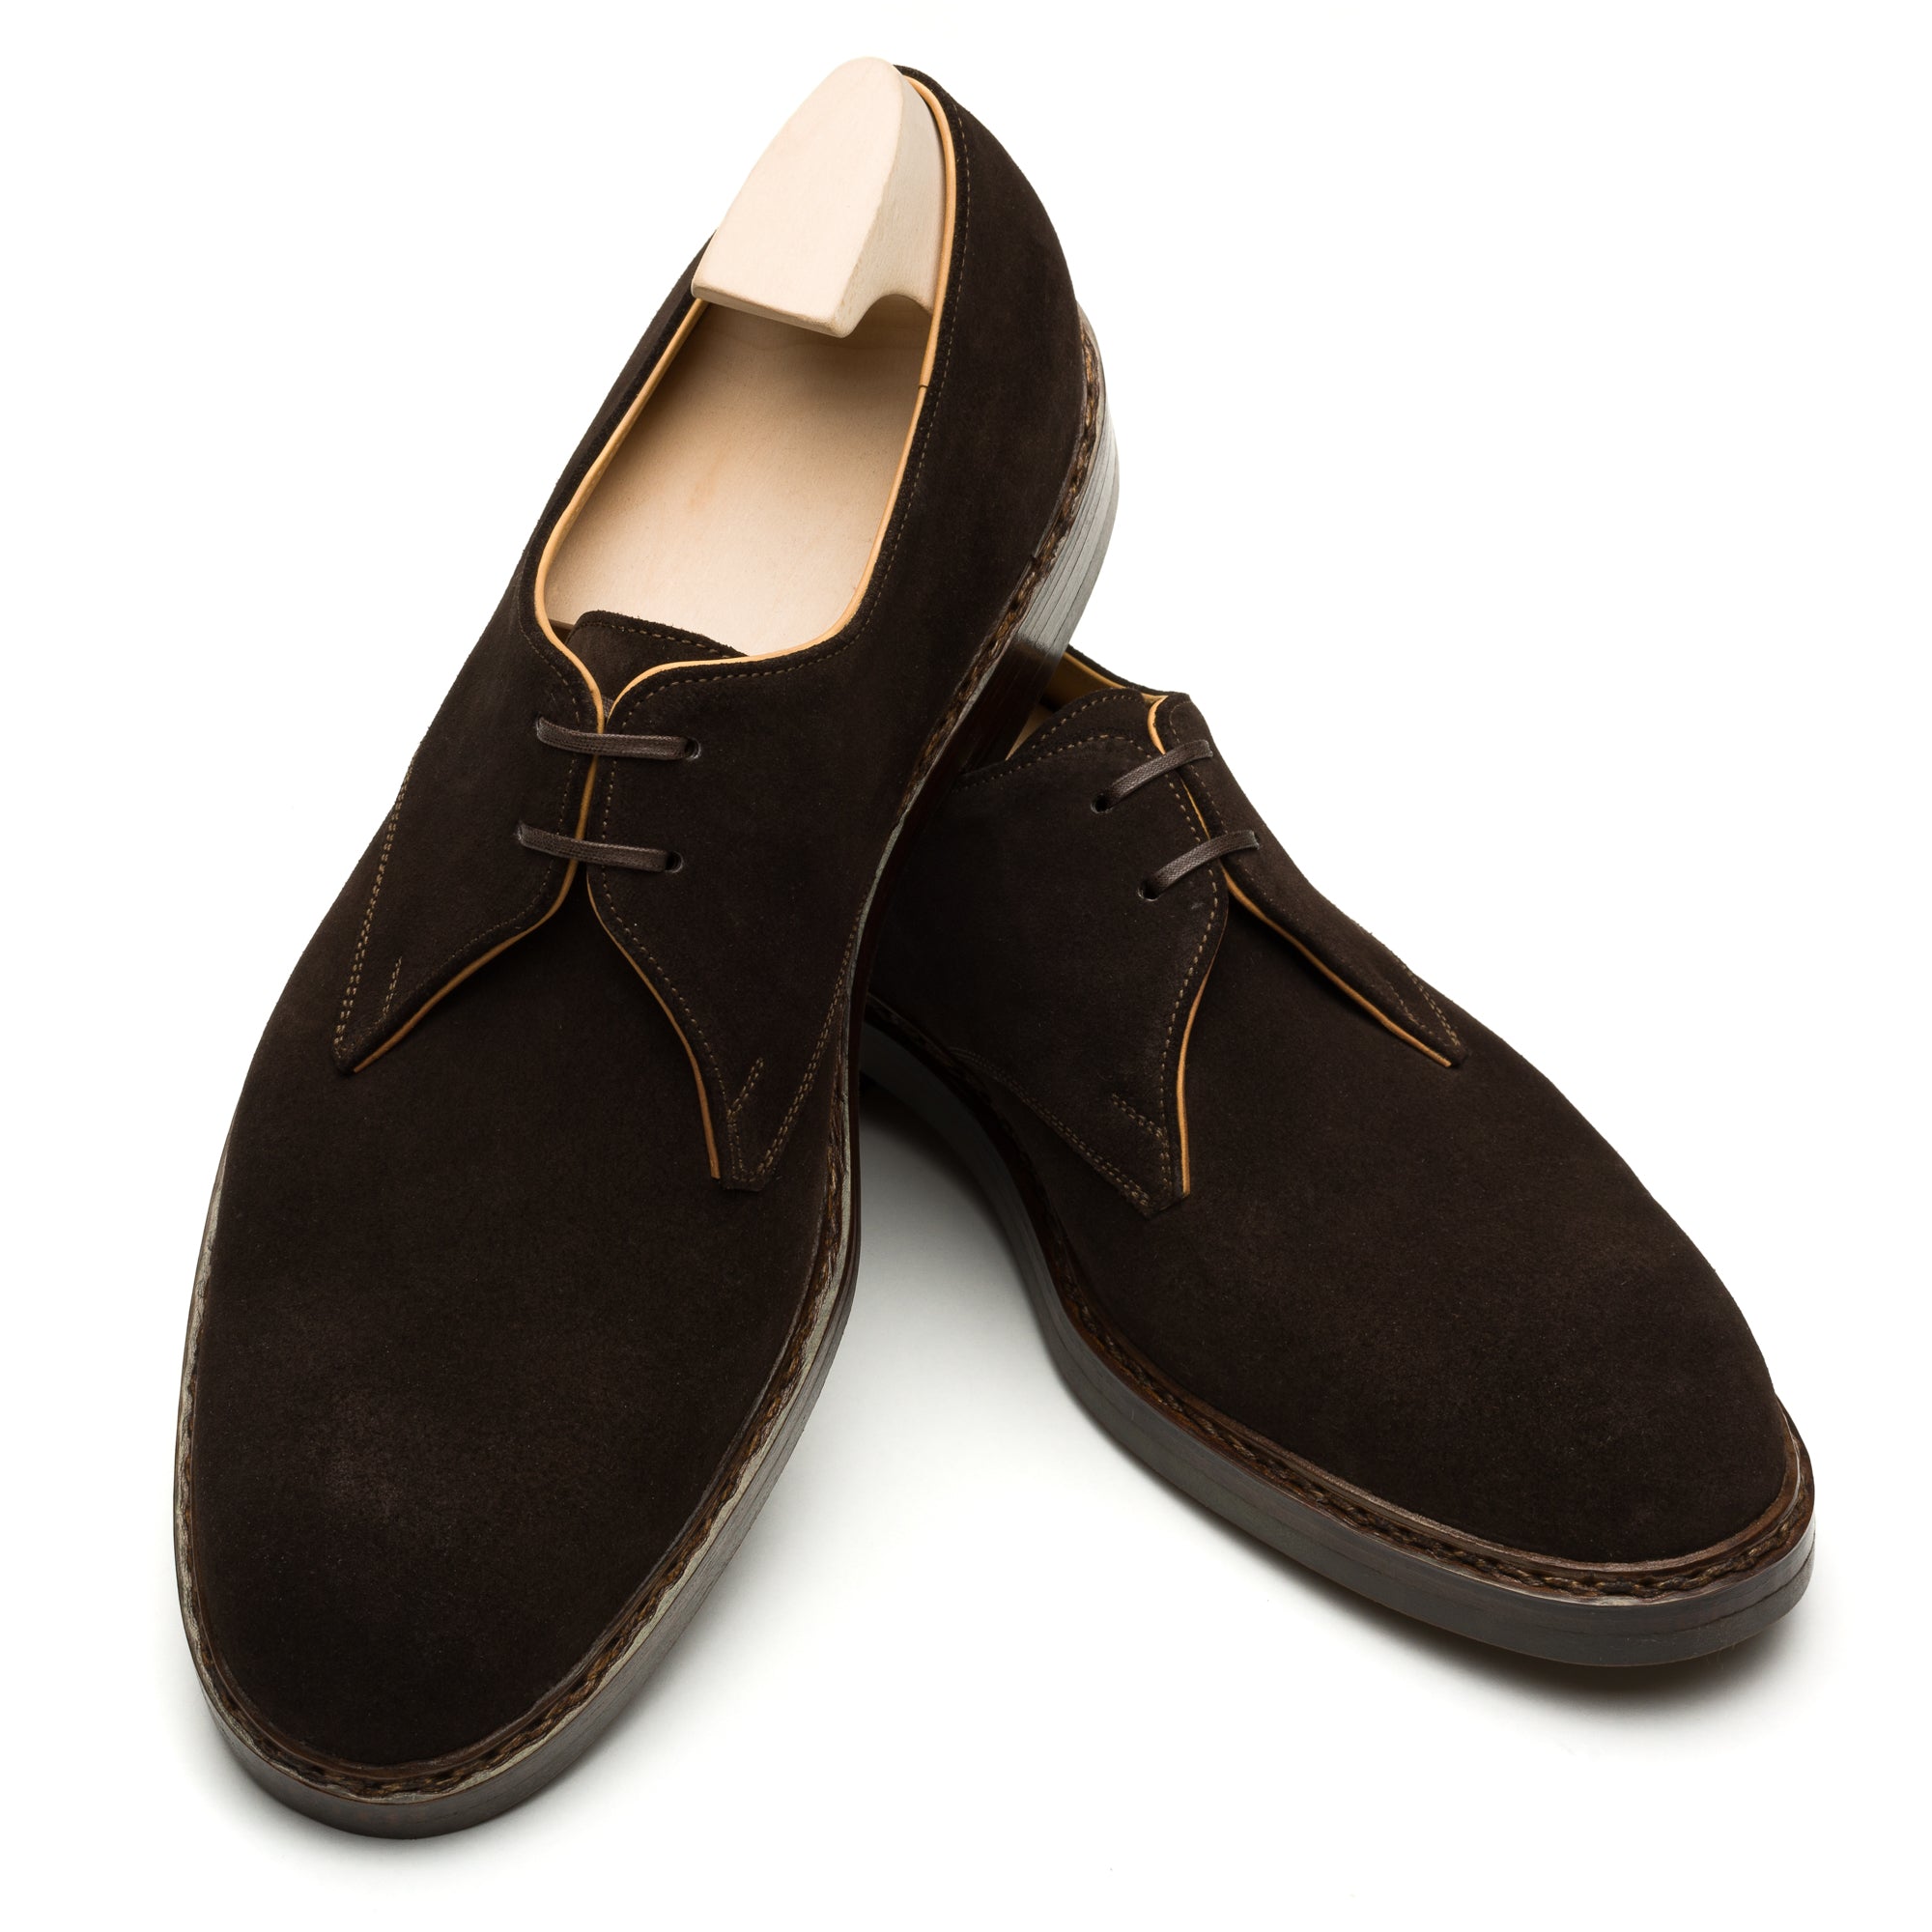 PASSUS SHOES Handmade "Tom" Dark Brown Suede Derby Shoes 7.5 NEW 40.5 PASSUS SHOES